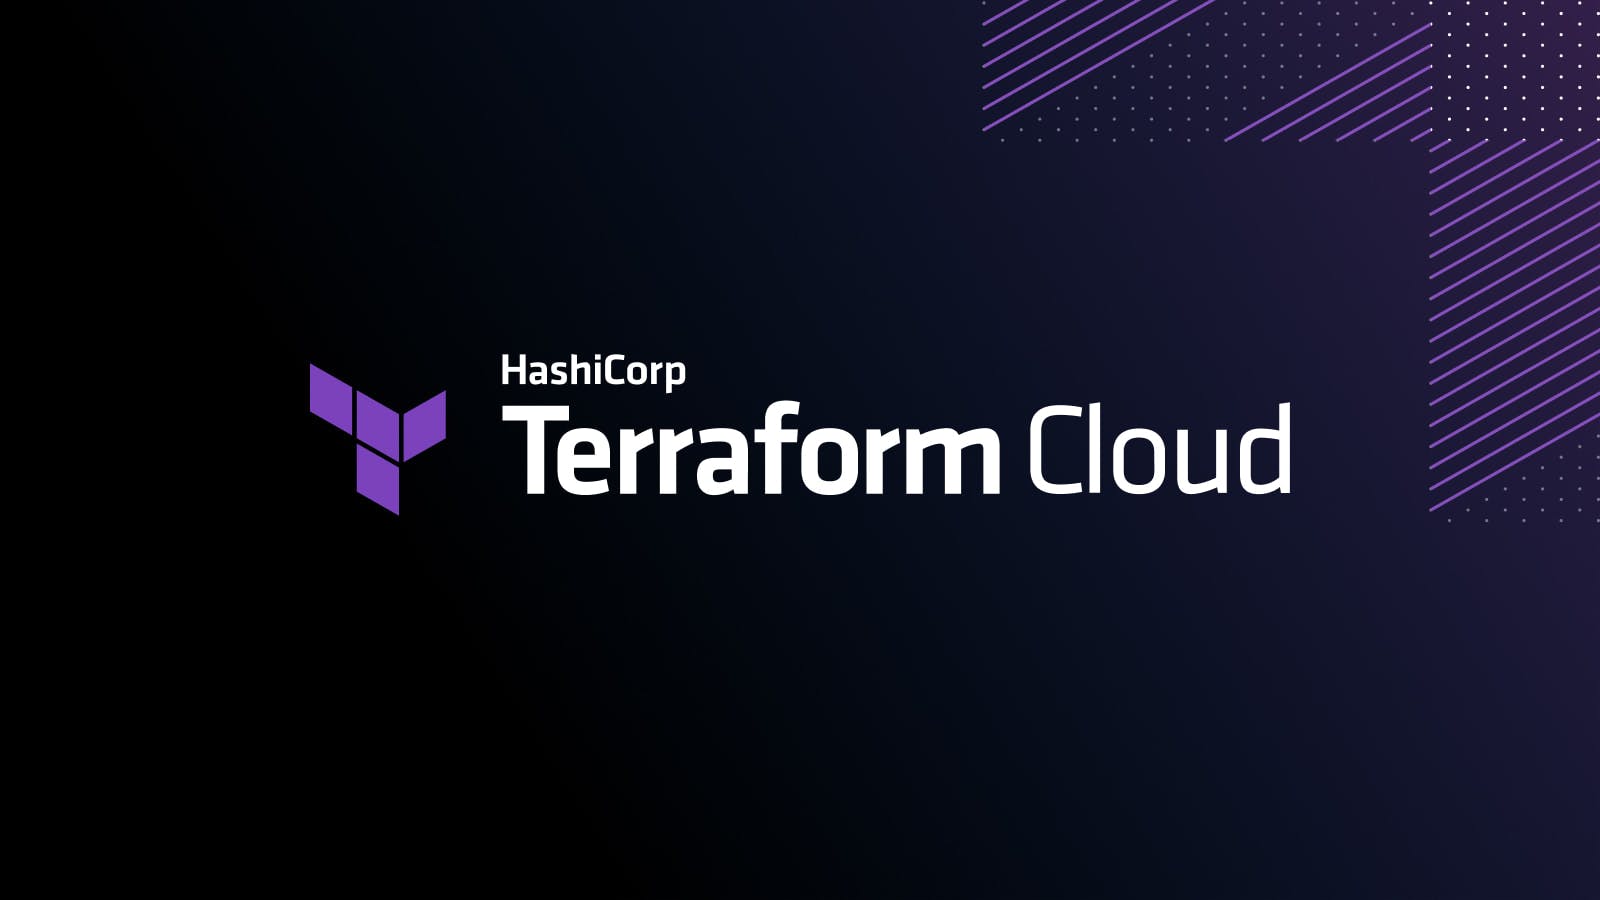 Run Tasks Are Now Available in the Terraform Registry